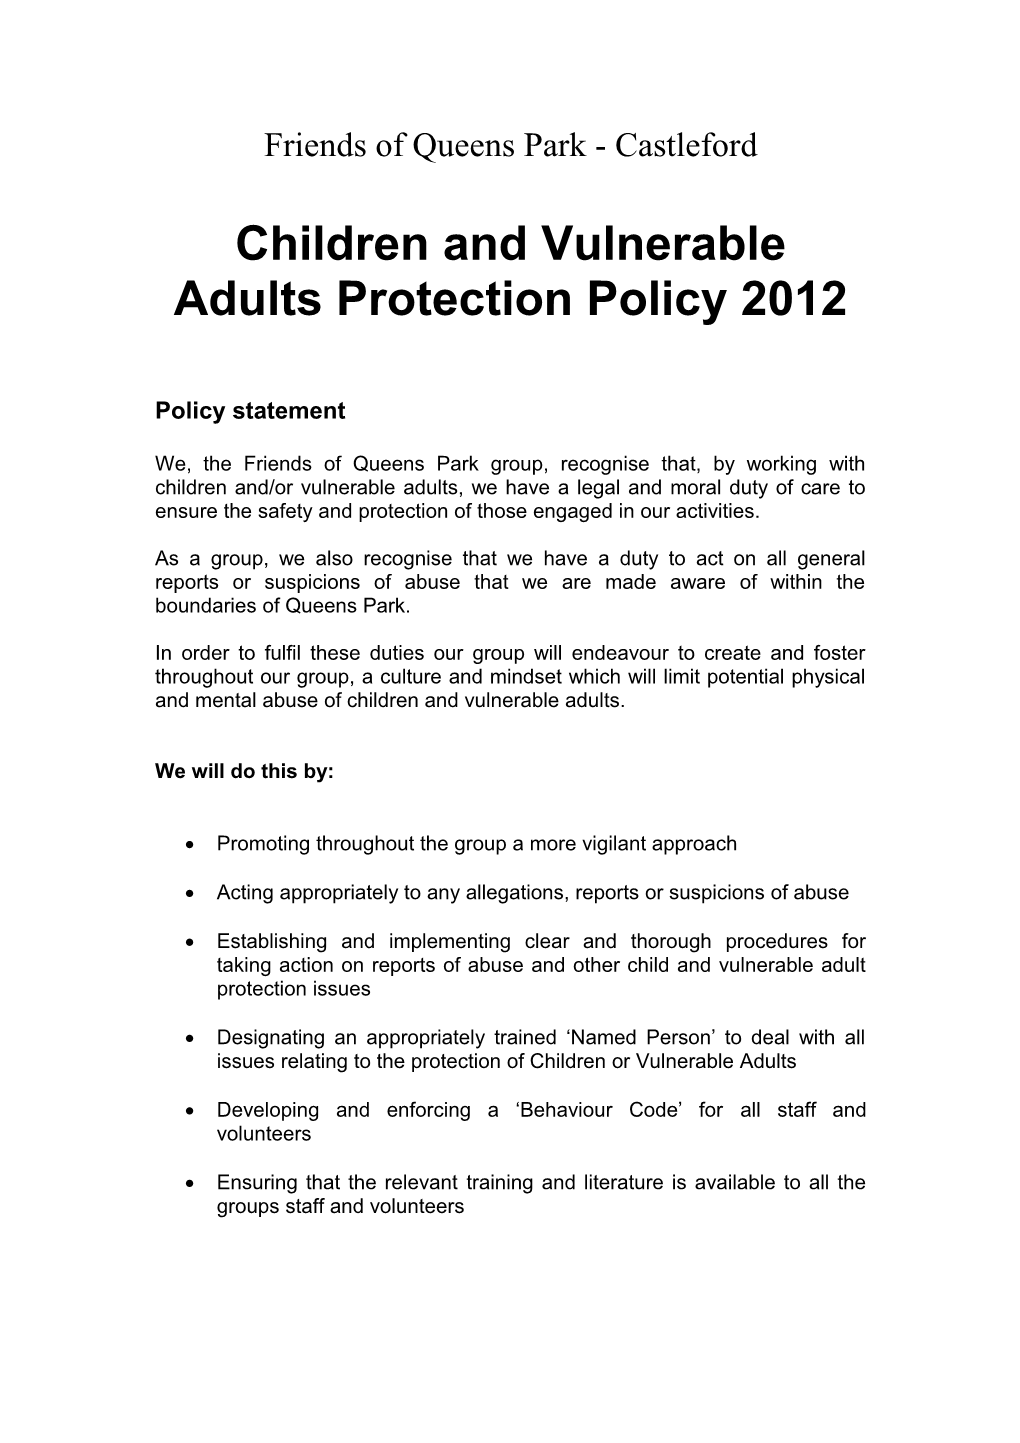 Sample Child and Vulnerable Adult Protection Policy and Procedures Document